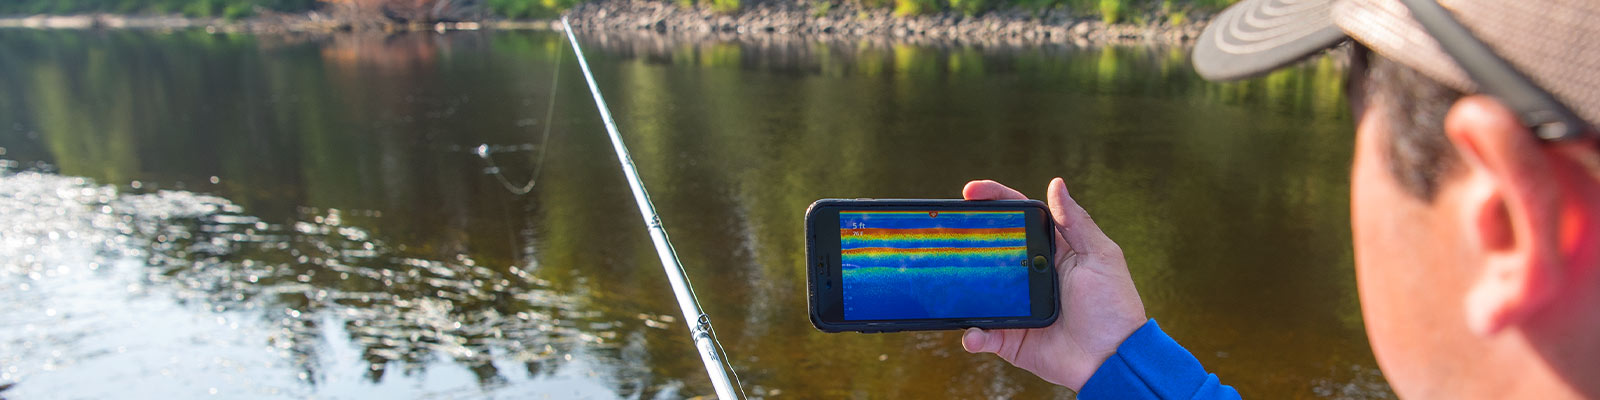 This Castable Fish Finder Is A Game Changer For Anglers—And It's $50 Off  Right Now